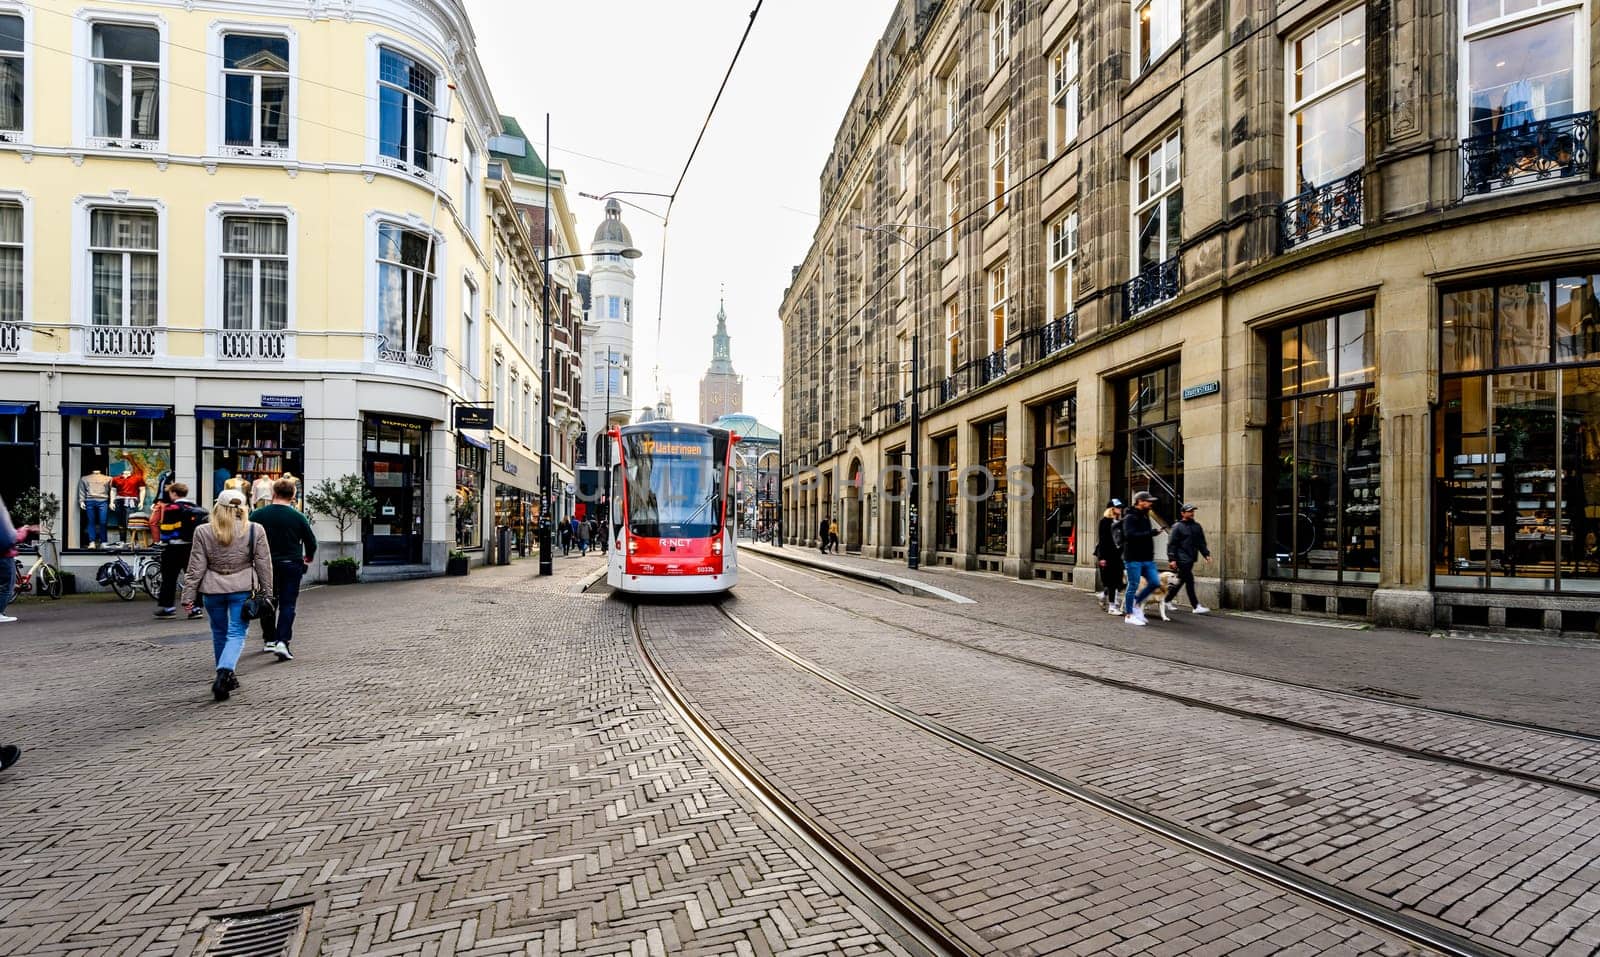 Hague, Netherland - 09 April 2023: tram rides on Rails in the center of Hague in Netherlands